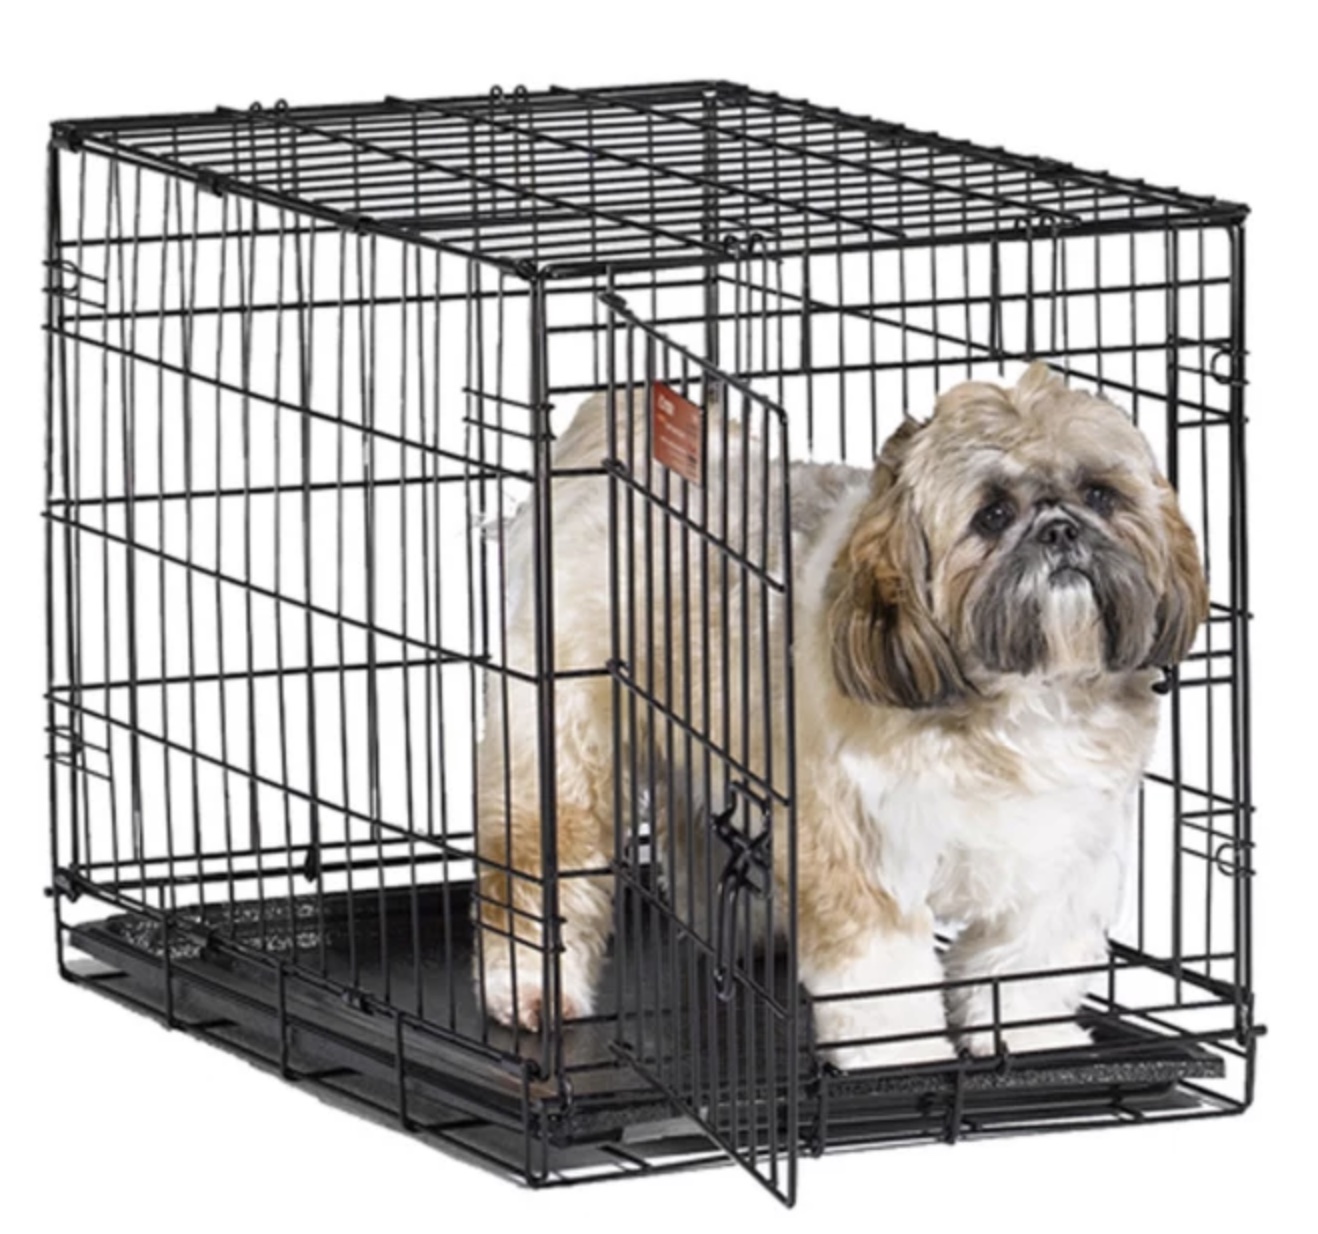 Canadian Tire dog crate. 